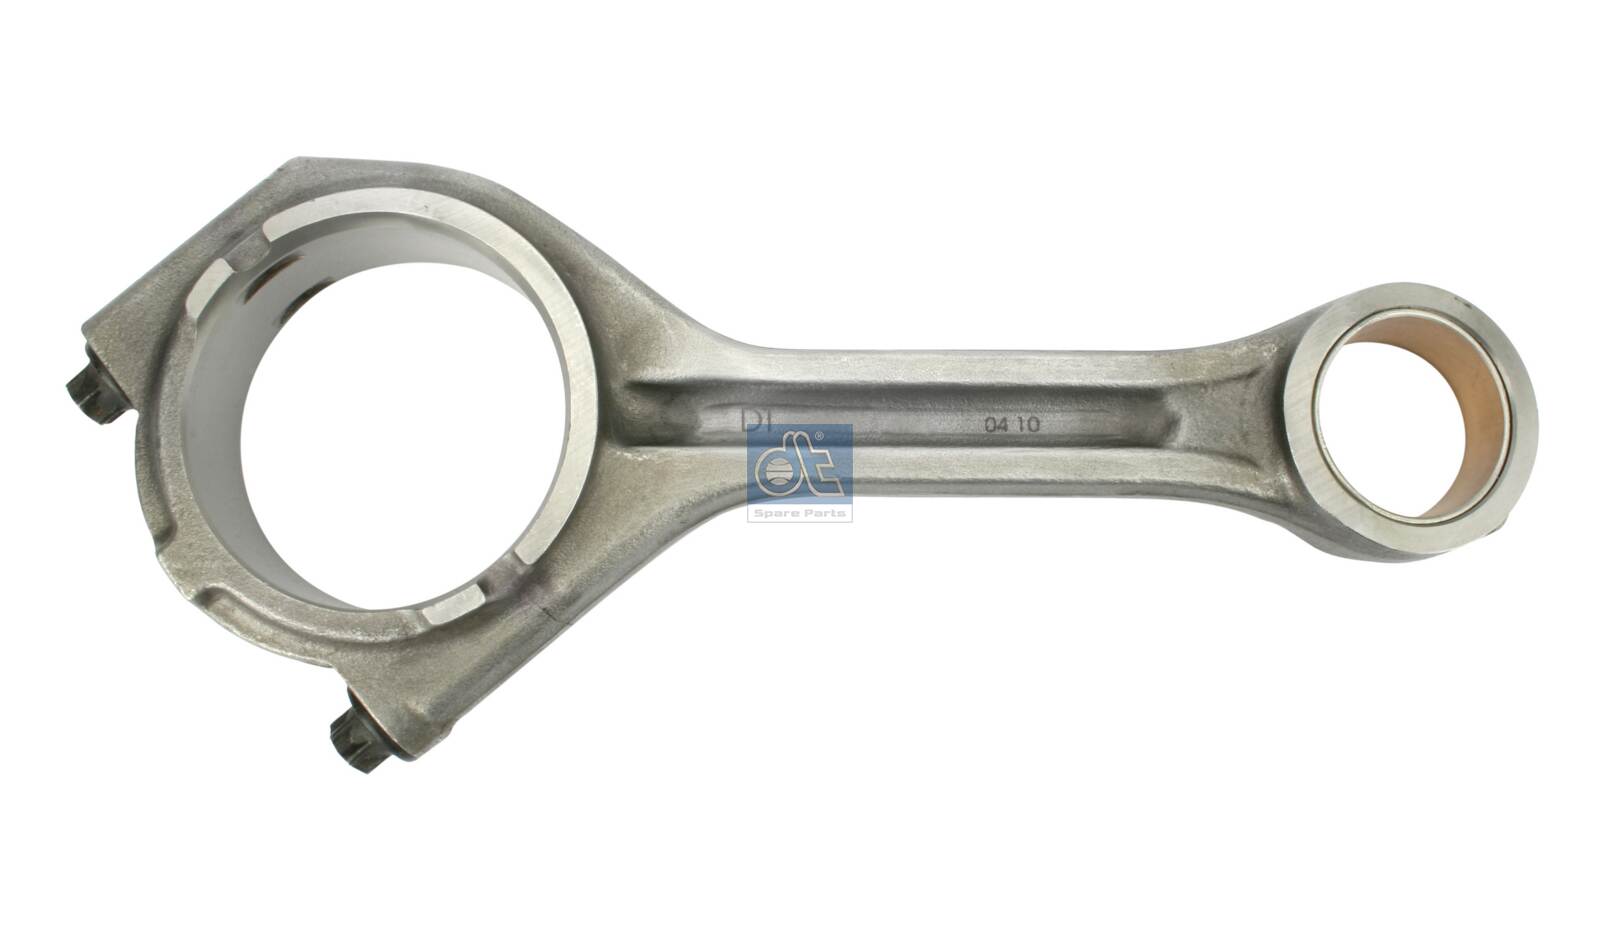 Connecting Rod - 3.11022 DT Spare Parts - 51.02400.6011, 51.02400.6012, 51.02400.6049